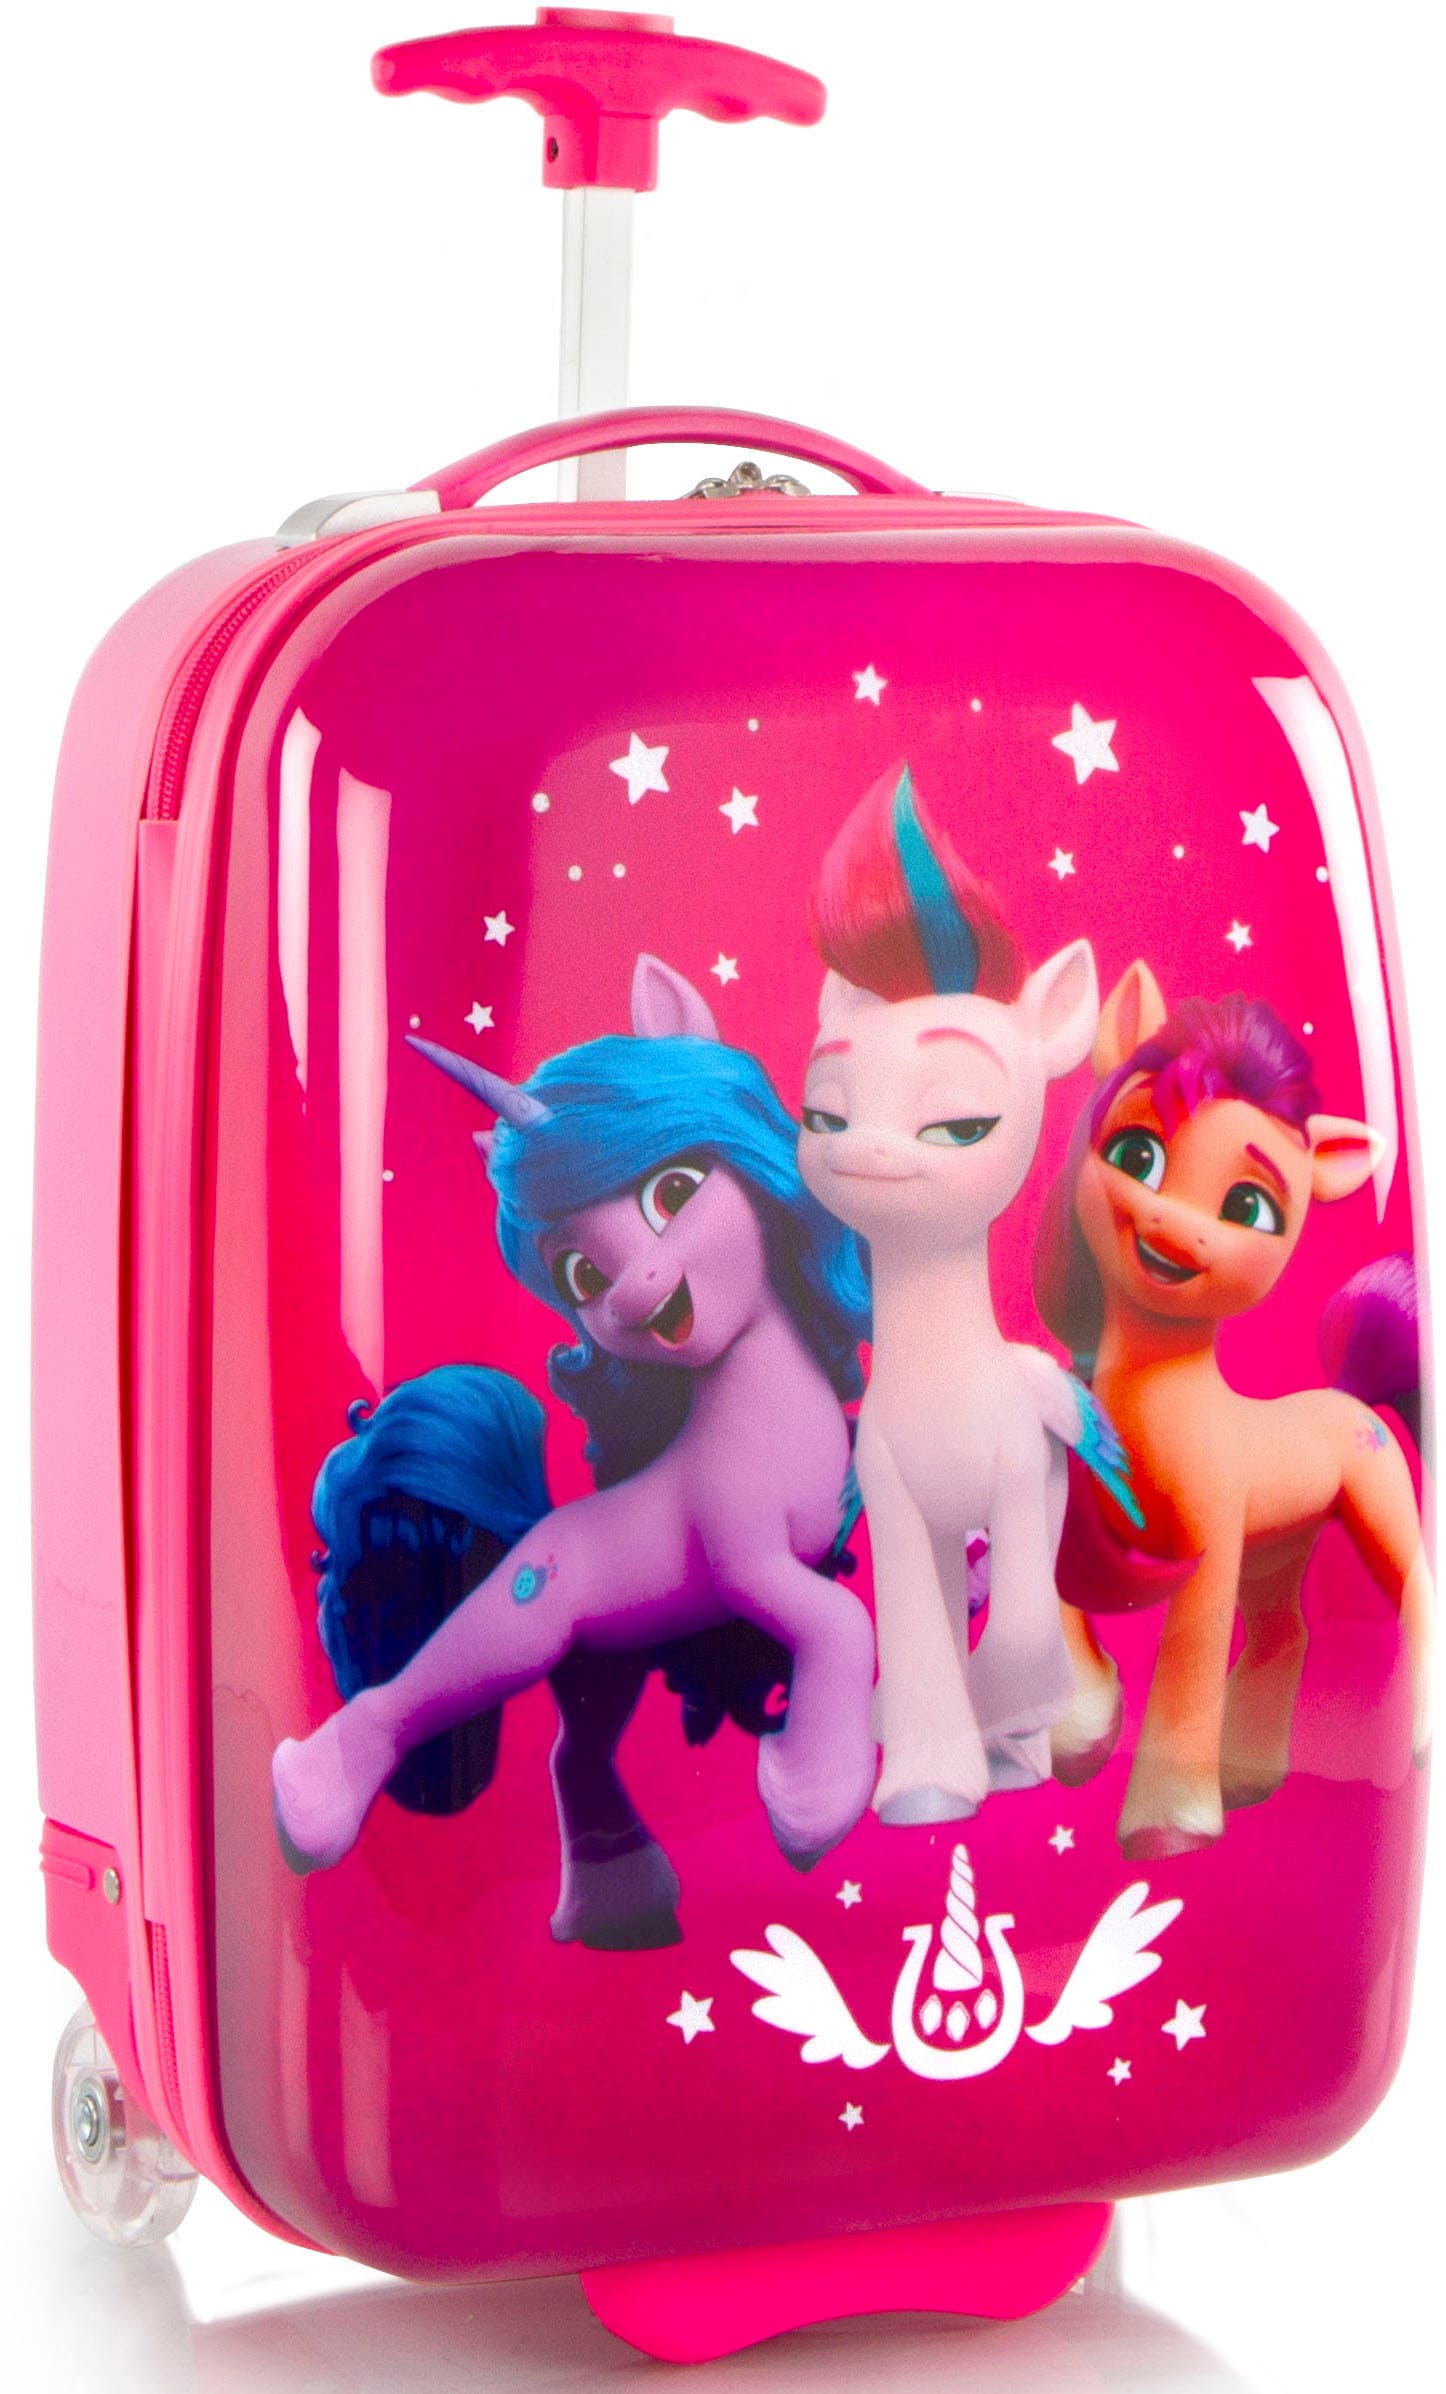 Heys Kinderkoffer »My Little Pony pink 46 c...